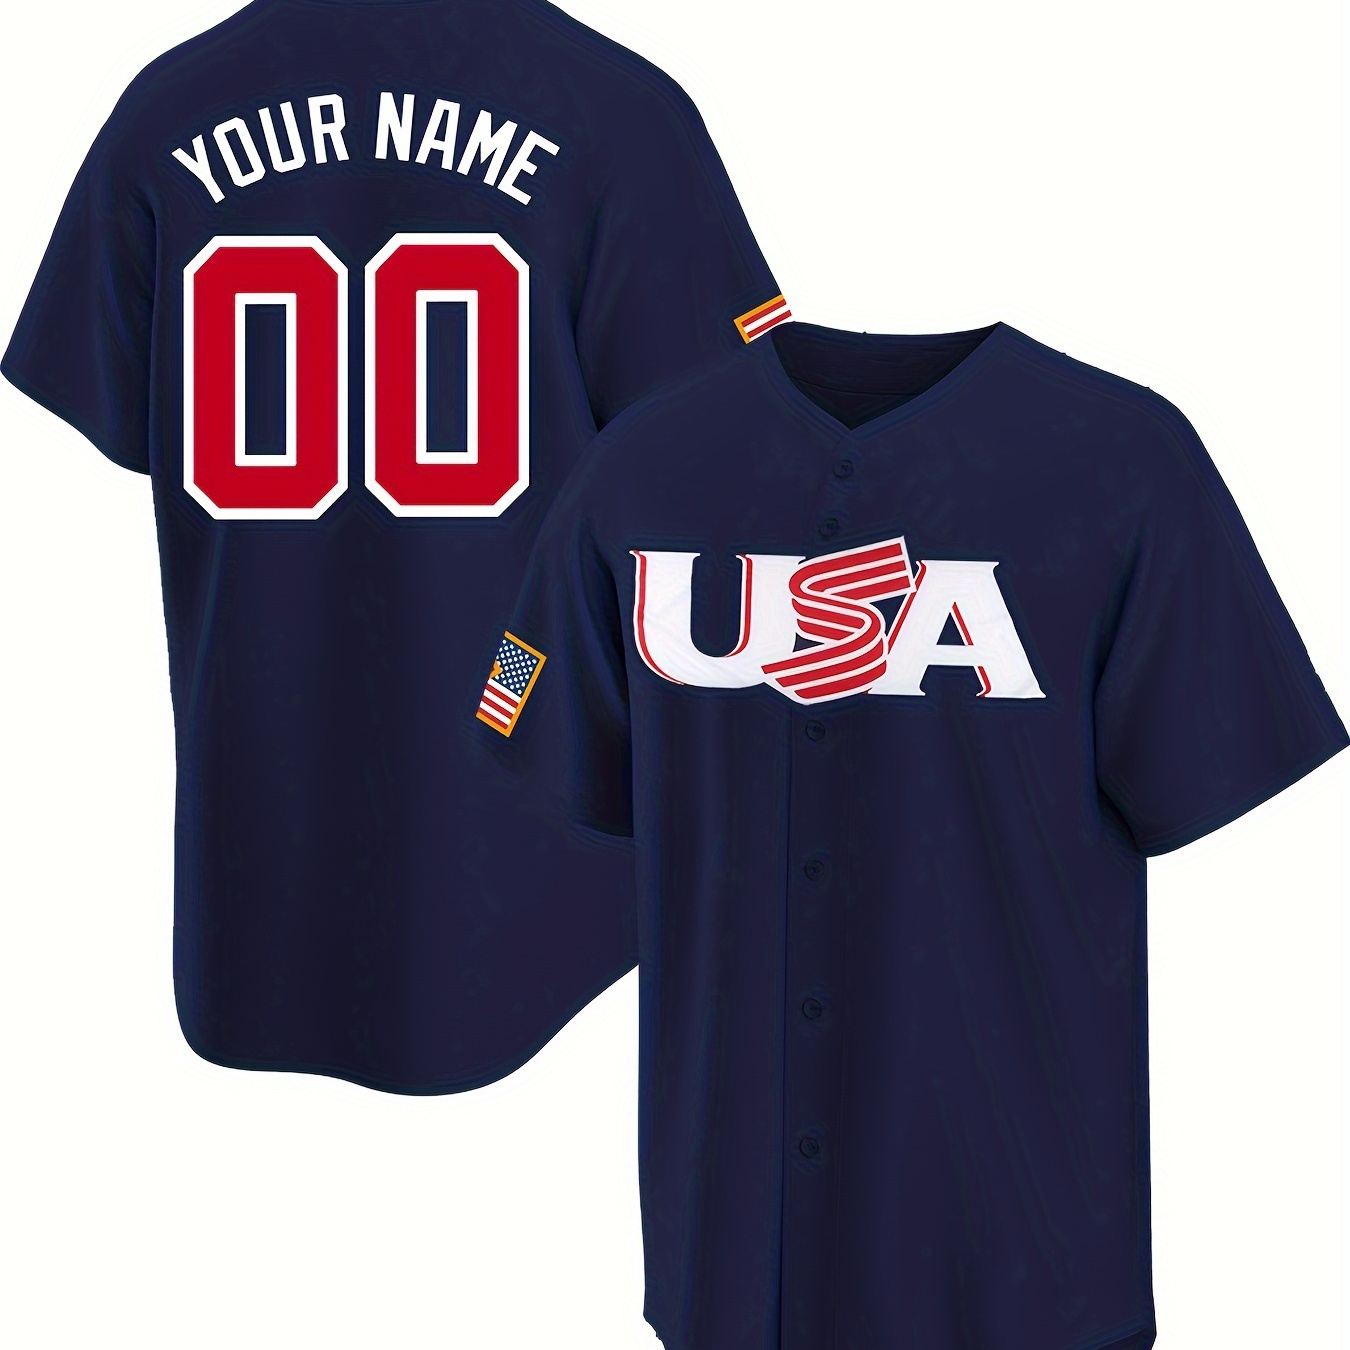 

Customized Name And Number Design, Men's Usa Embroidery Design Short Sleeve Loose Breathable V-neck Baseball Jersey, Sports Shirt For Team Training